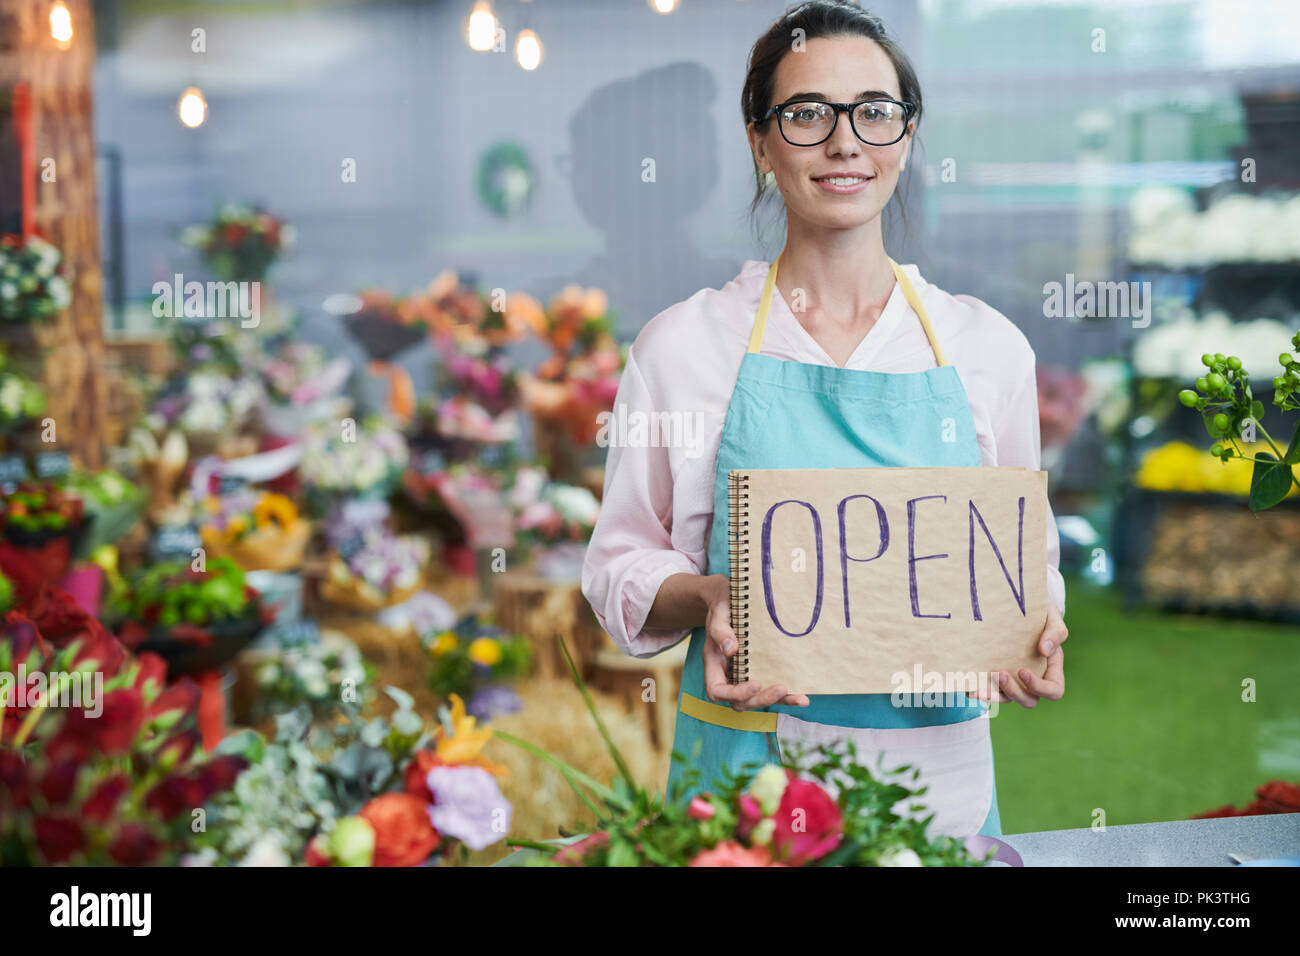 Shopkeeper Holding OPEN Sign Stock Photo